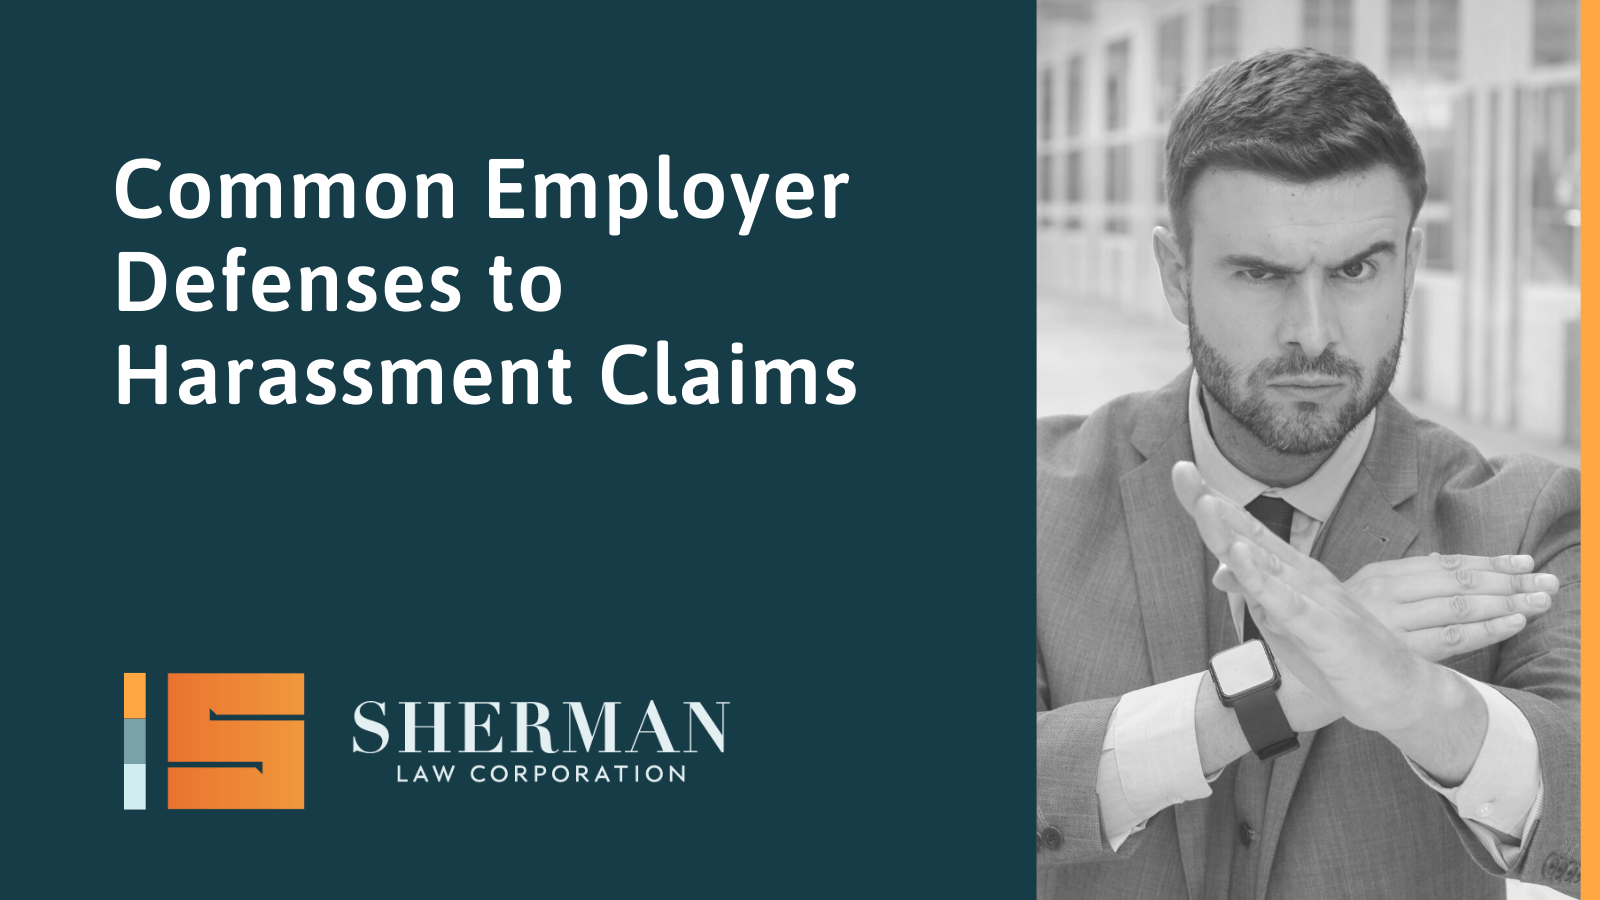 Common Employer Defenses to Harassment Claims- california employment lawyer - sherman law corporation